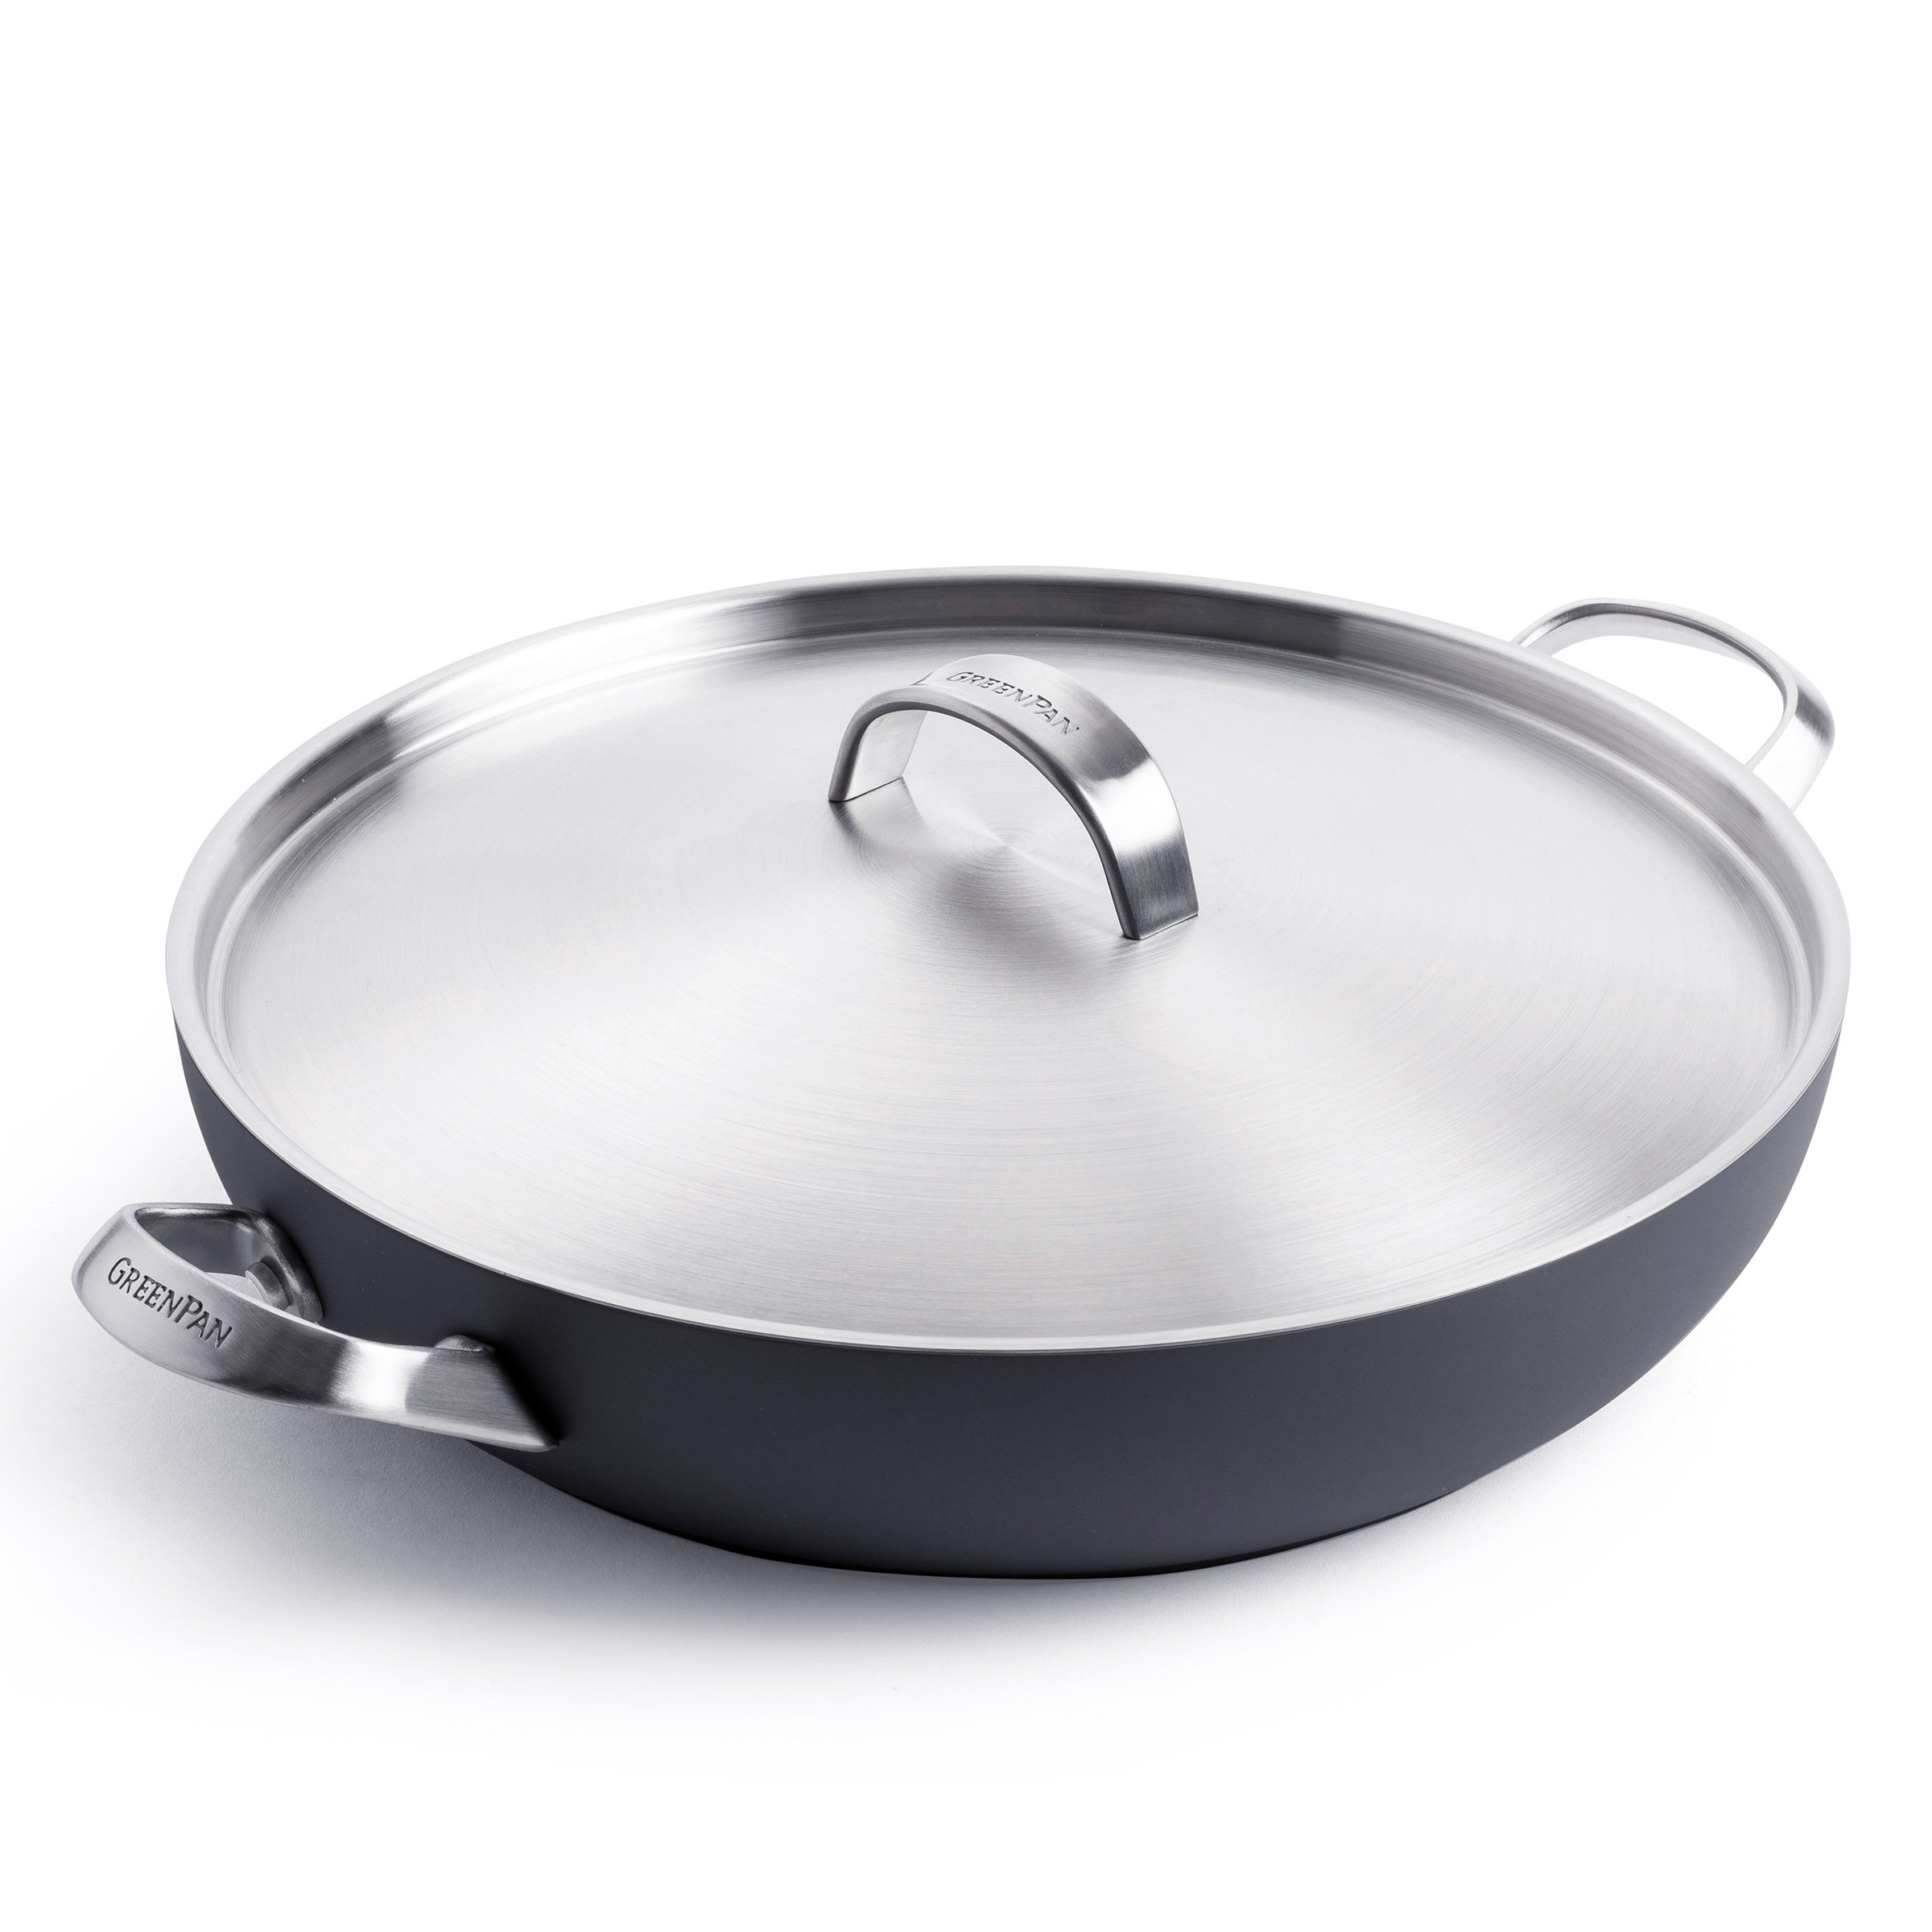 GreenPan Black Friday Sale: Healthy Nonstick Cookware Up To 65